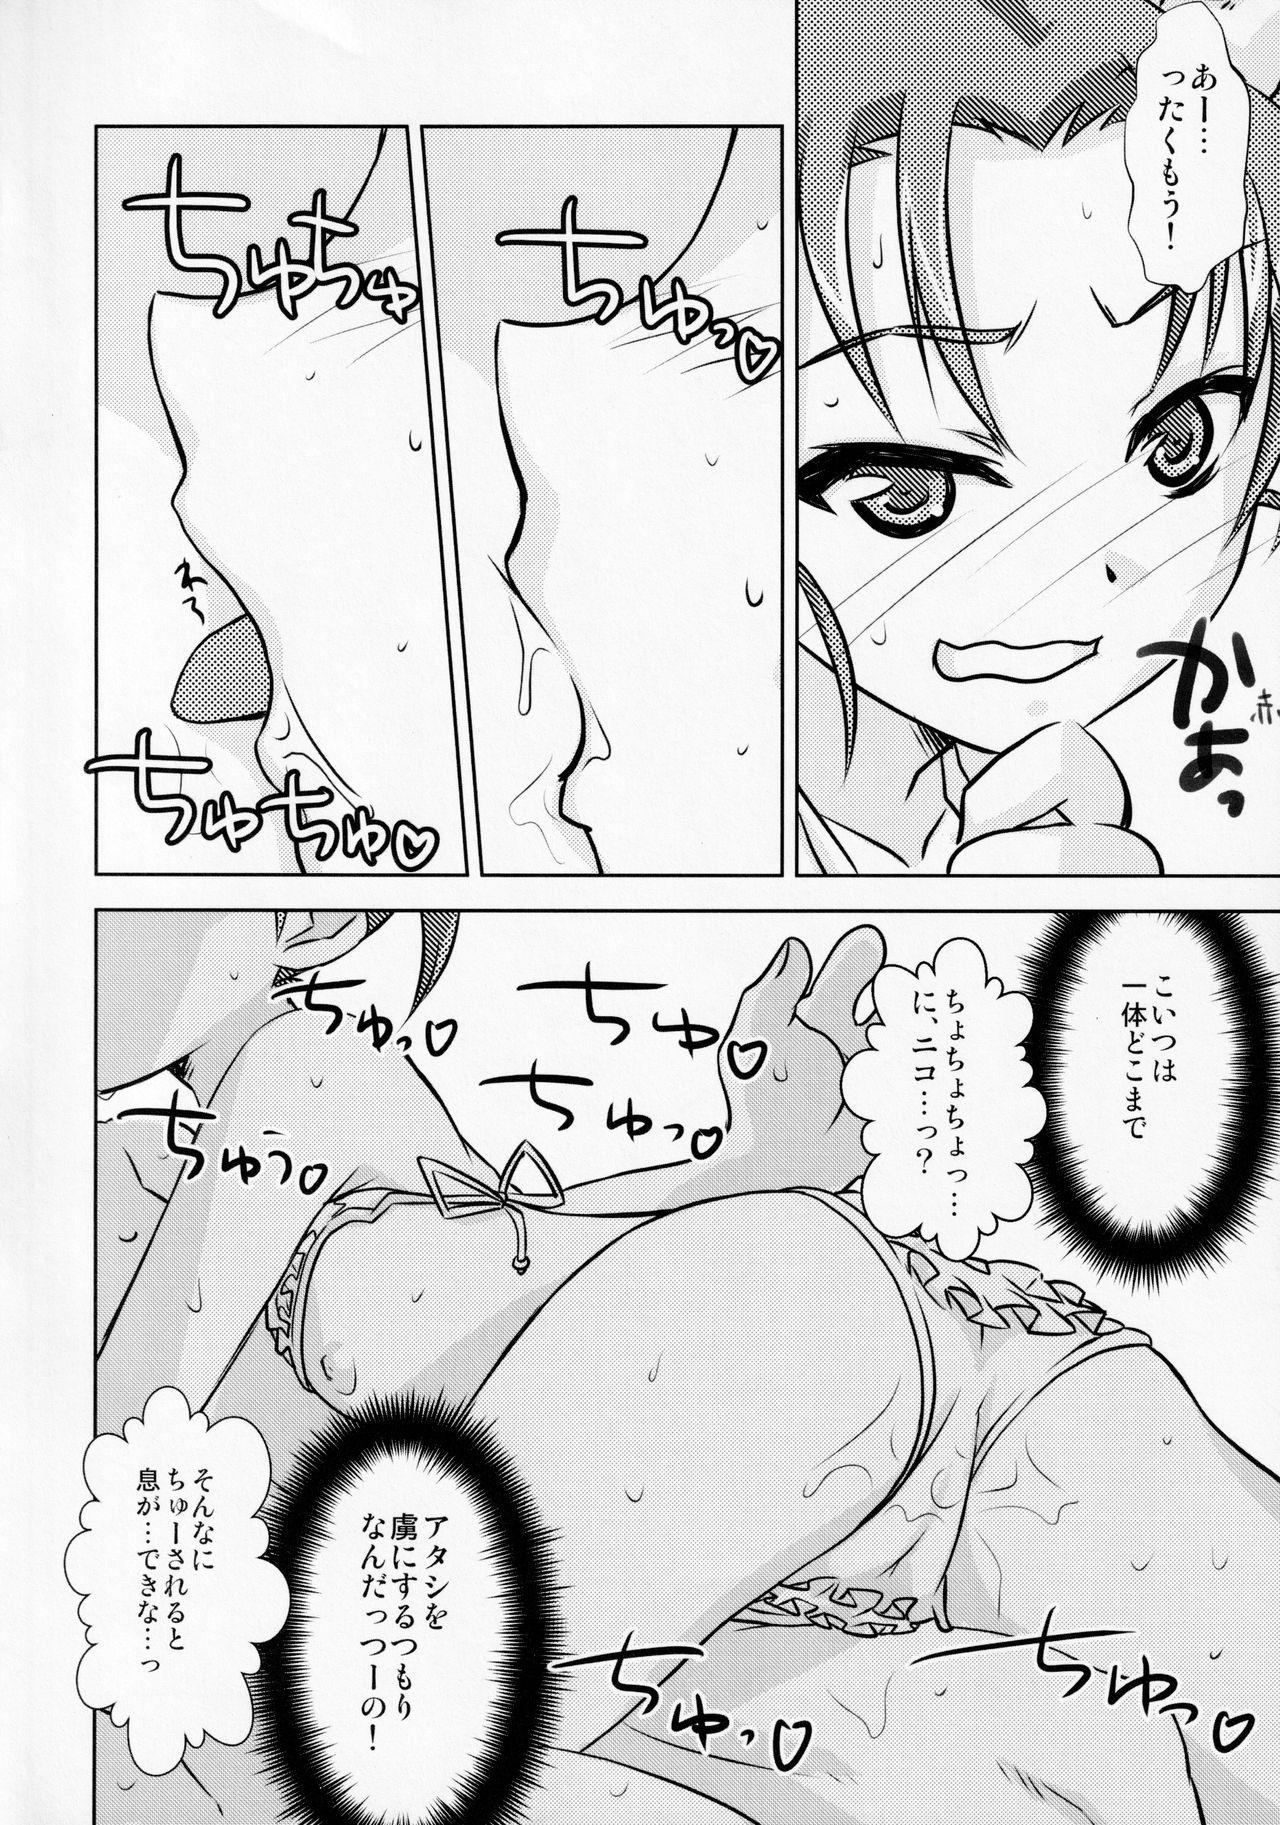 Tall Houkago Link 3 - Accel world Hardcore Rough Sex - Page 13